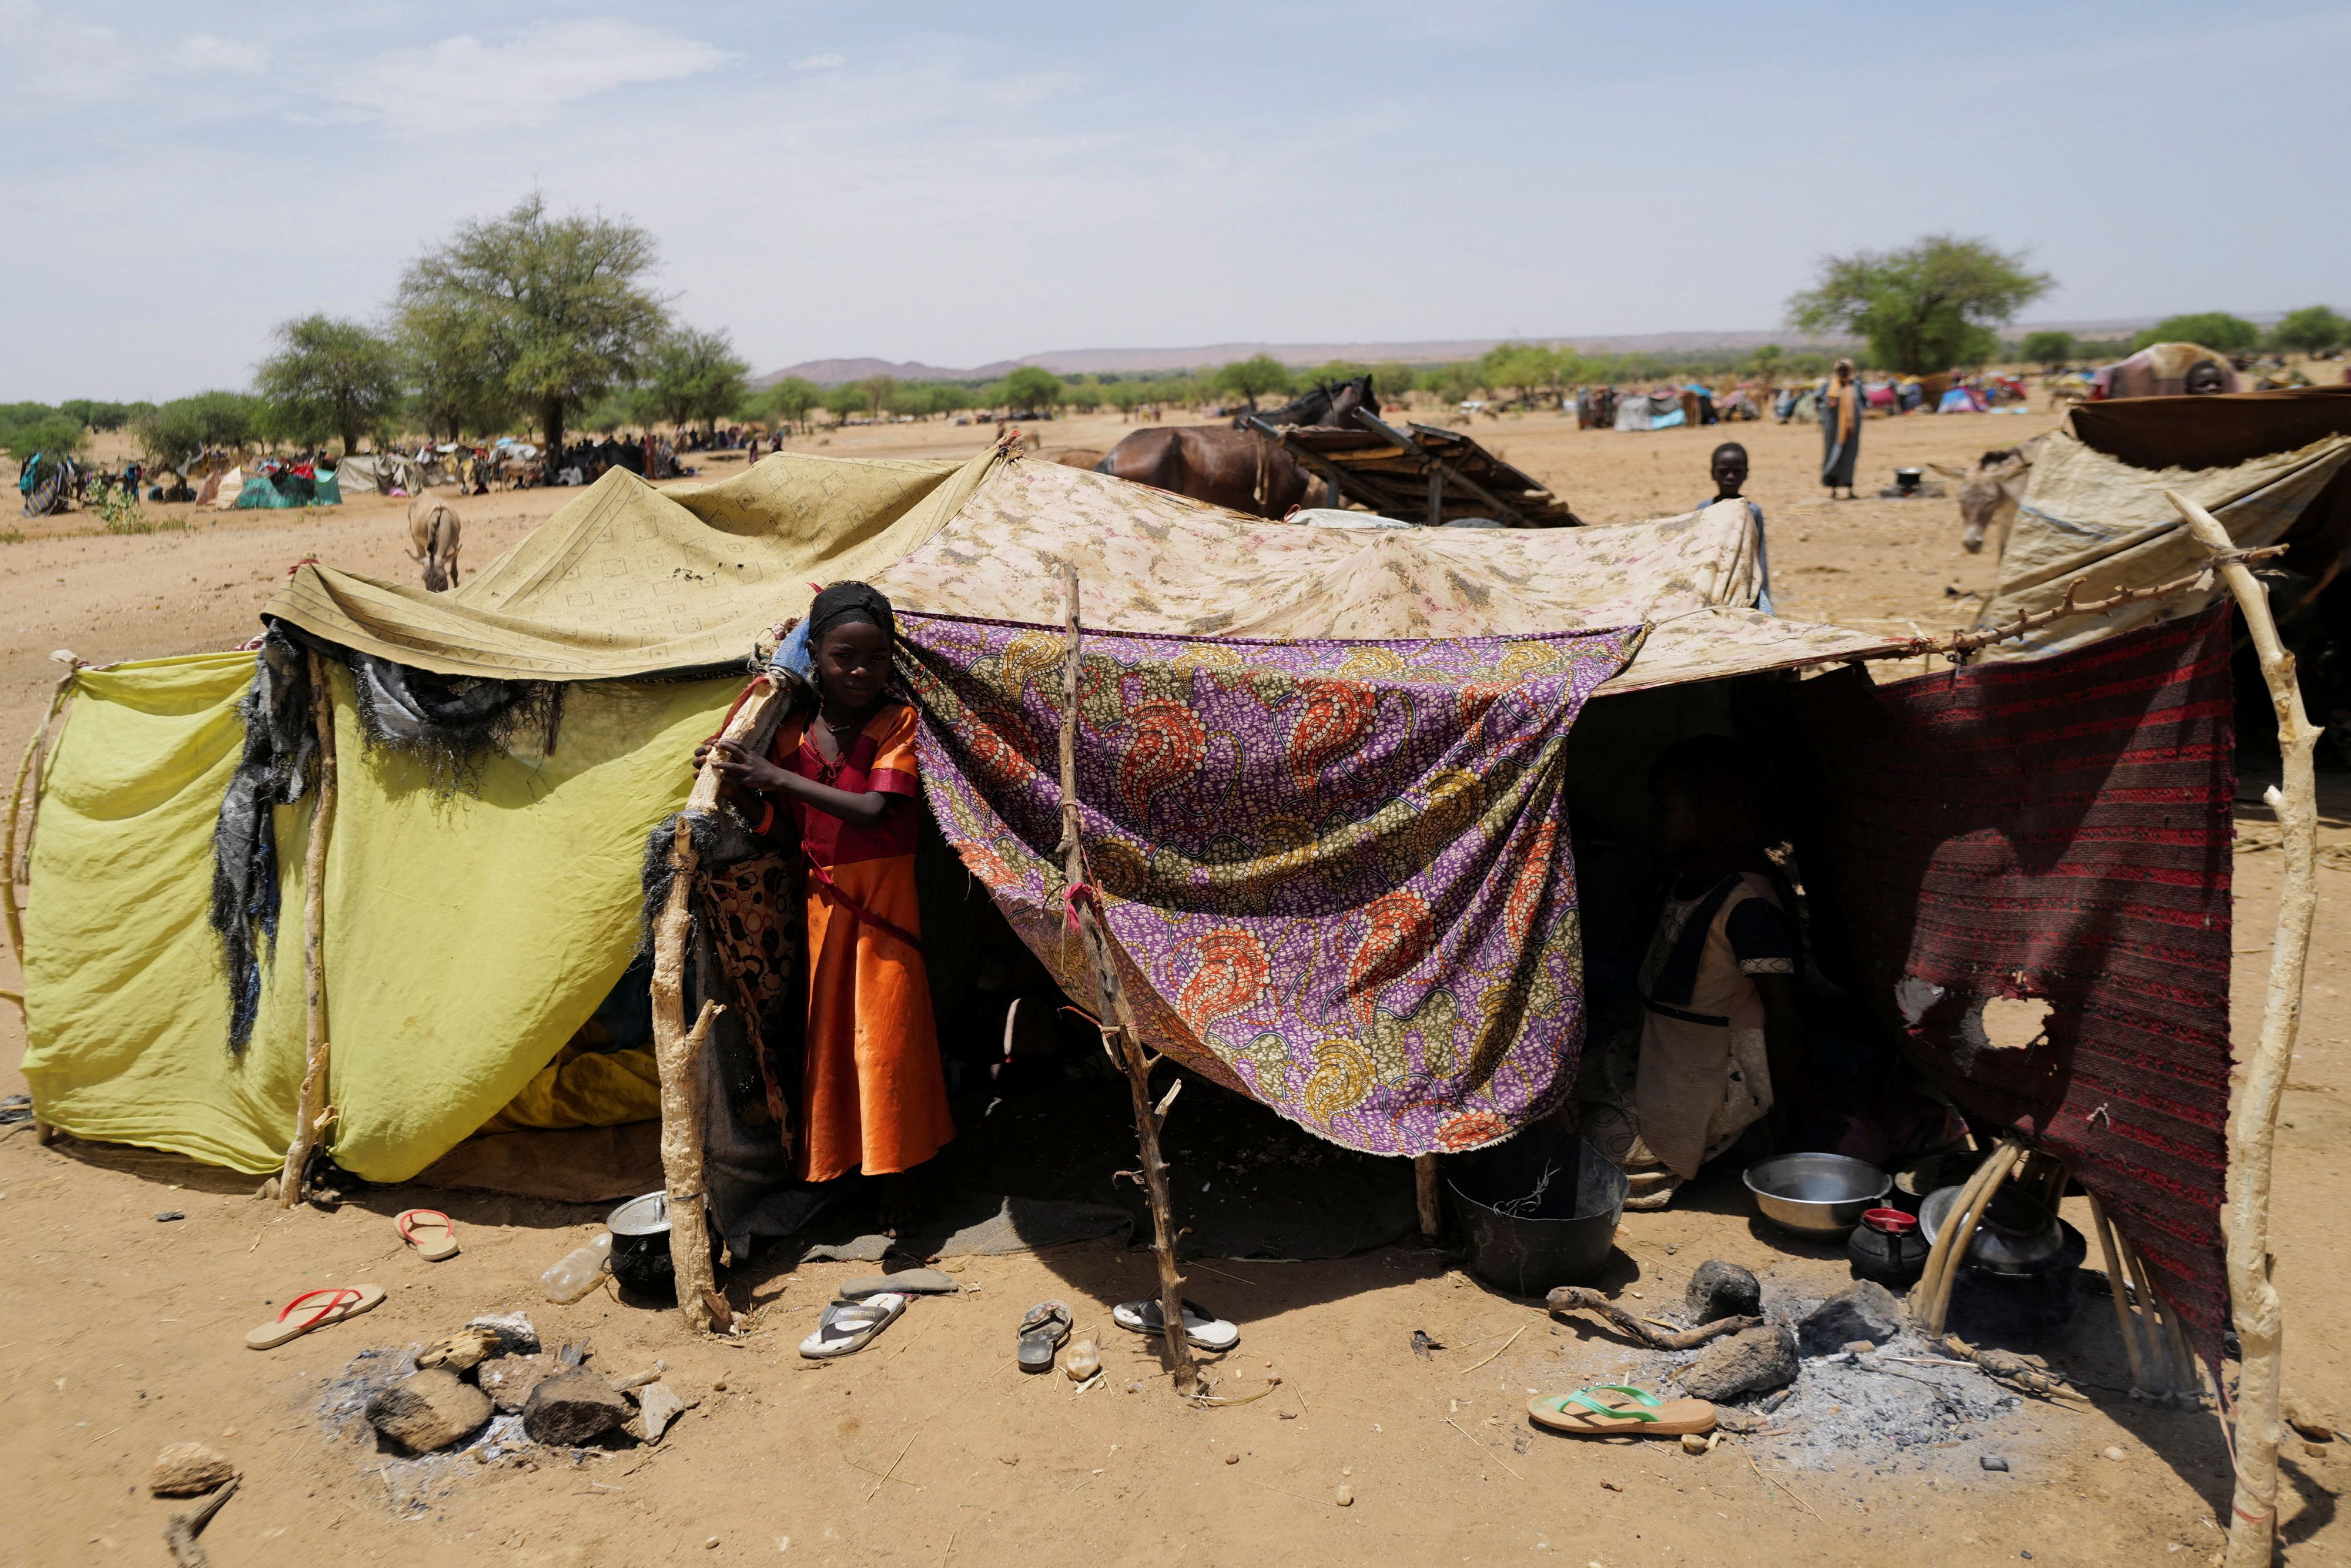 sudan’s war needs an african-led solution, says eu envoy to the horn of africa